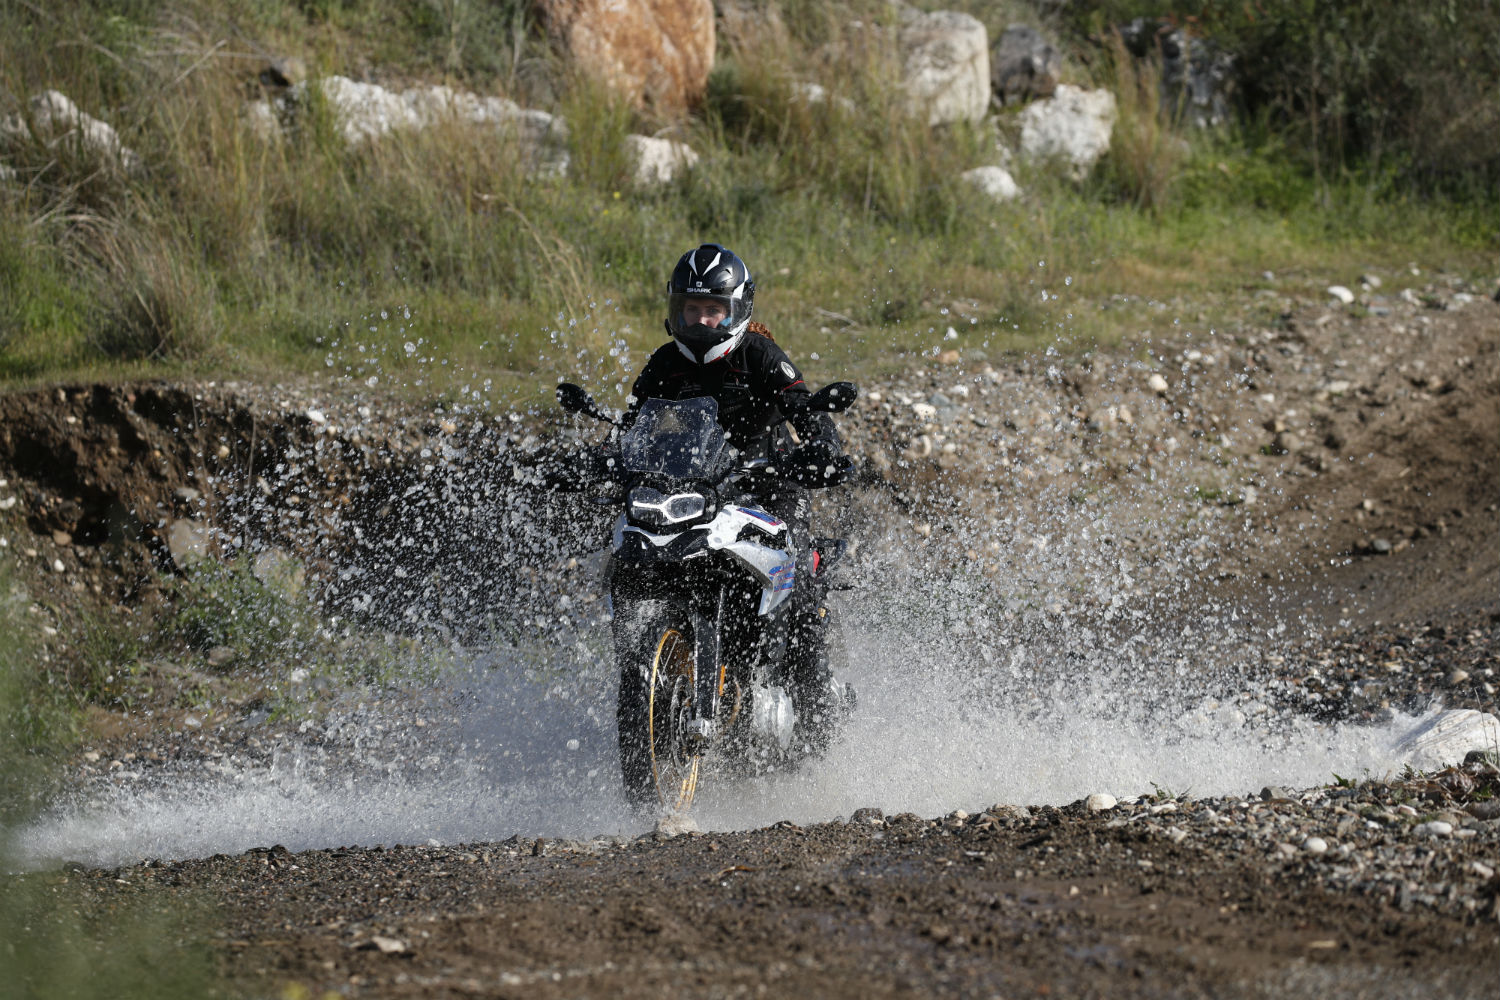 First ride: BMW F850GS and F750GS review